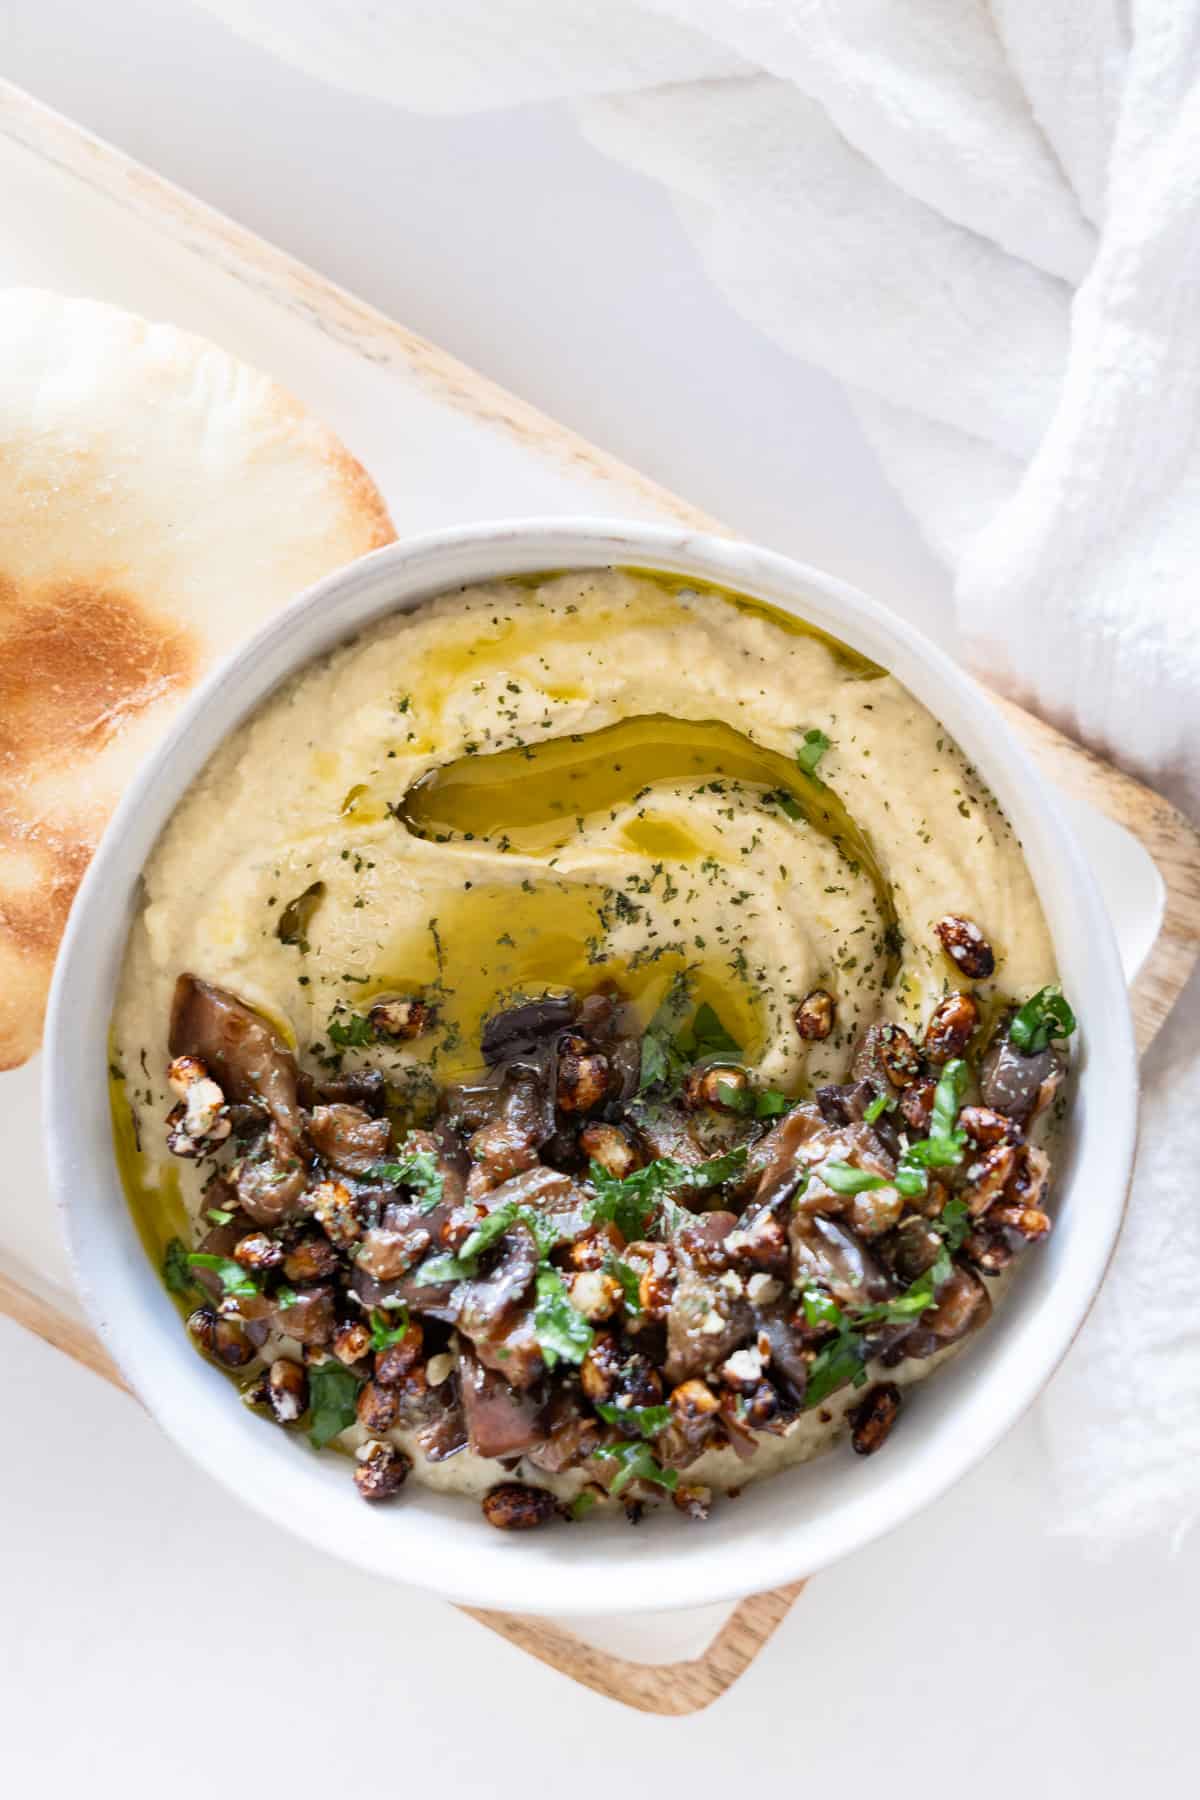 a bowl filled with a creamy eggplant dip topped with chopped cooked eggplant